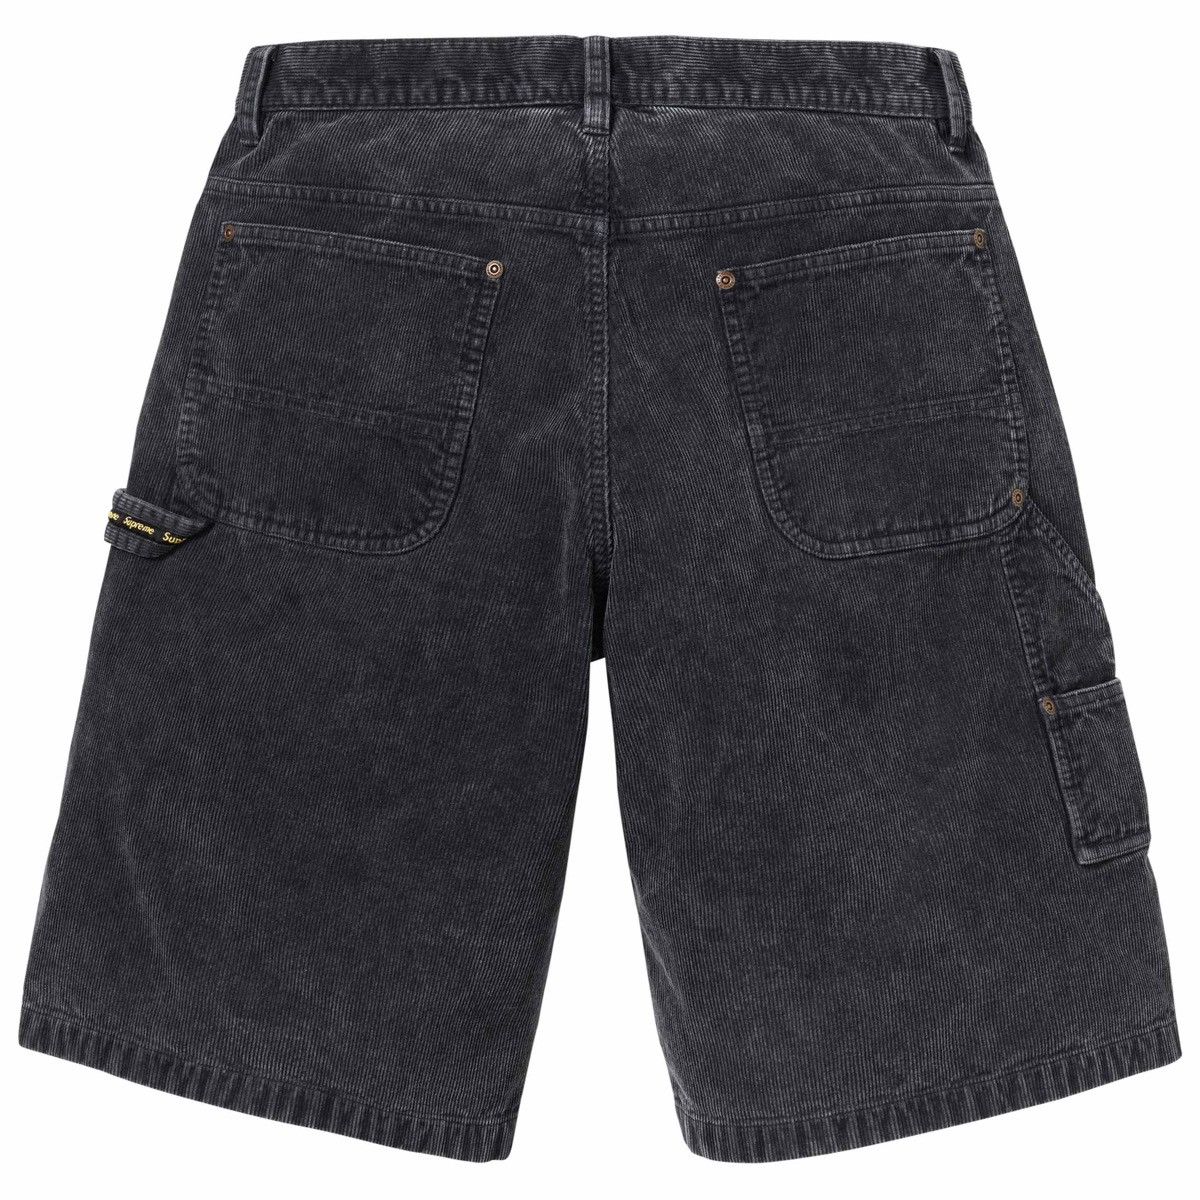 Supreme Supreme Washed Corduroy Double Knee Painter Short | Grailed